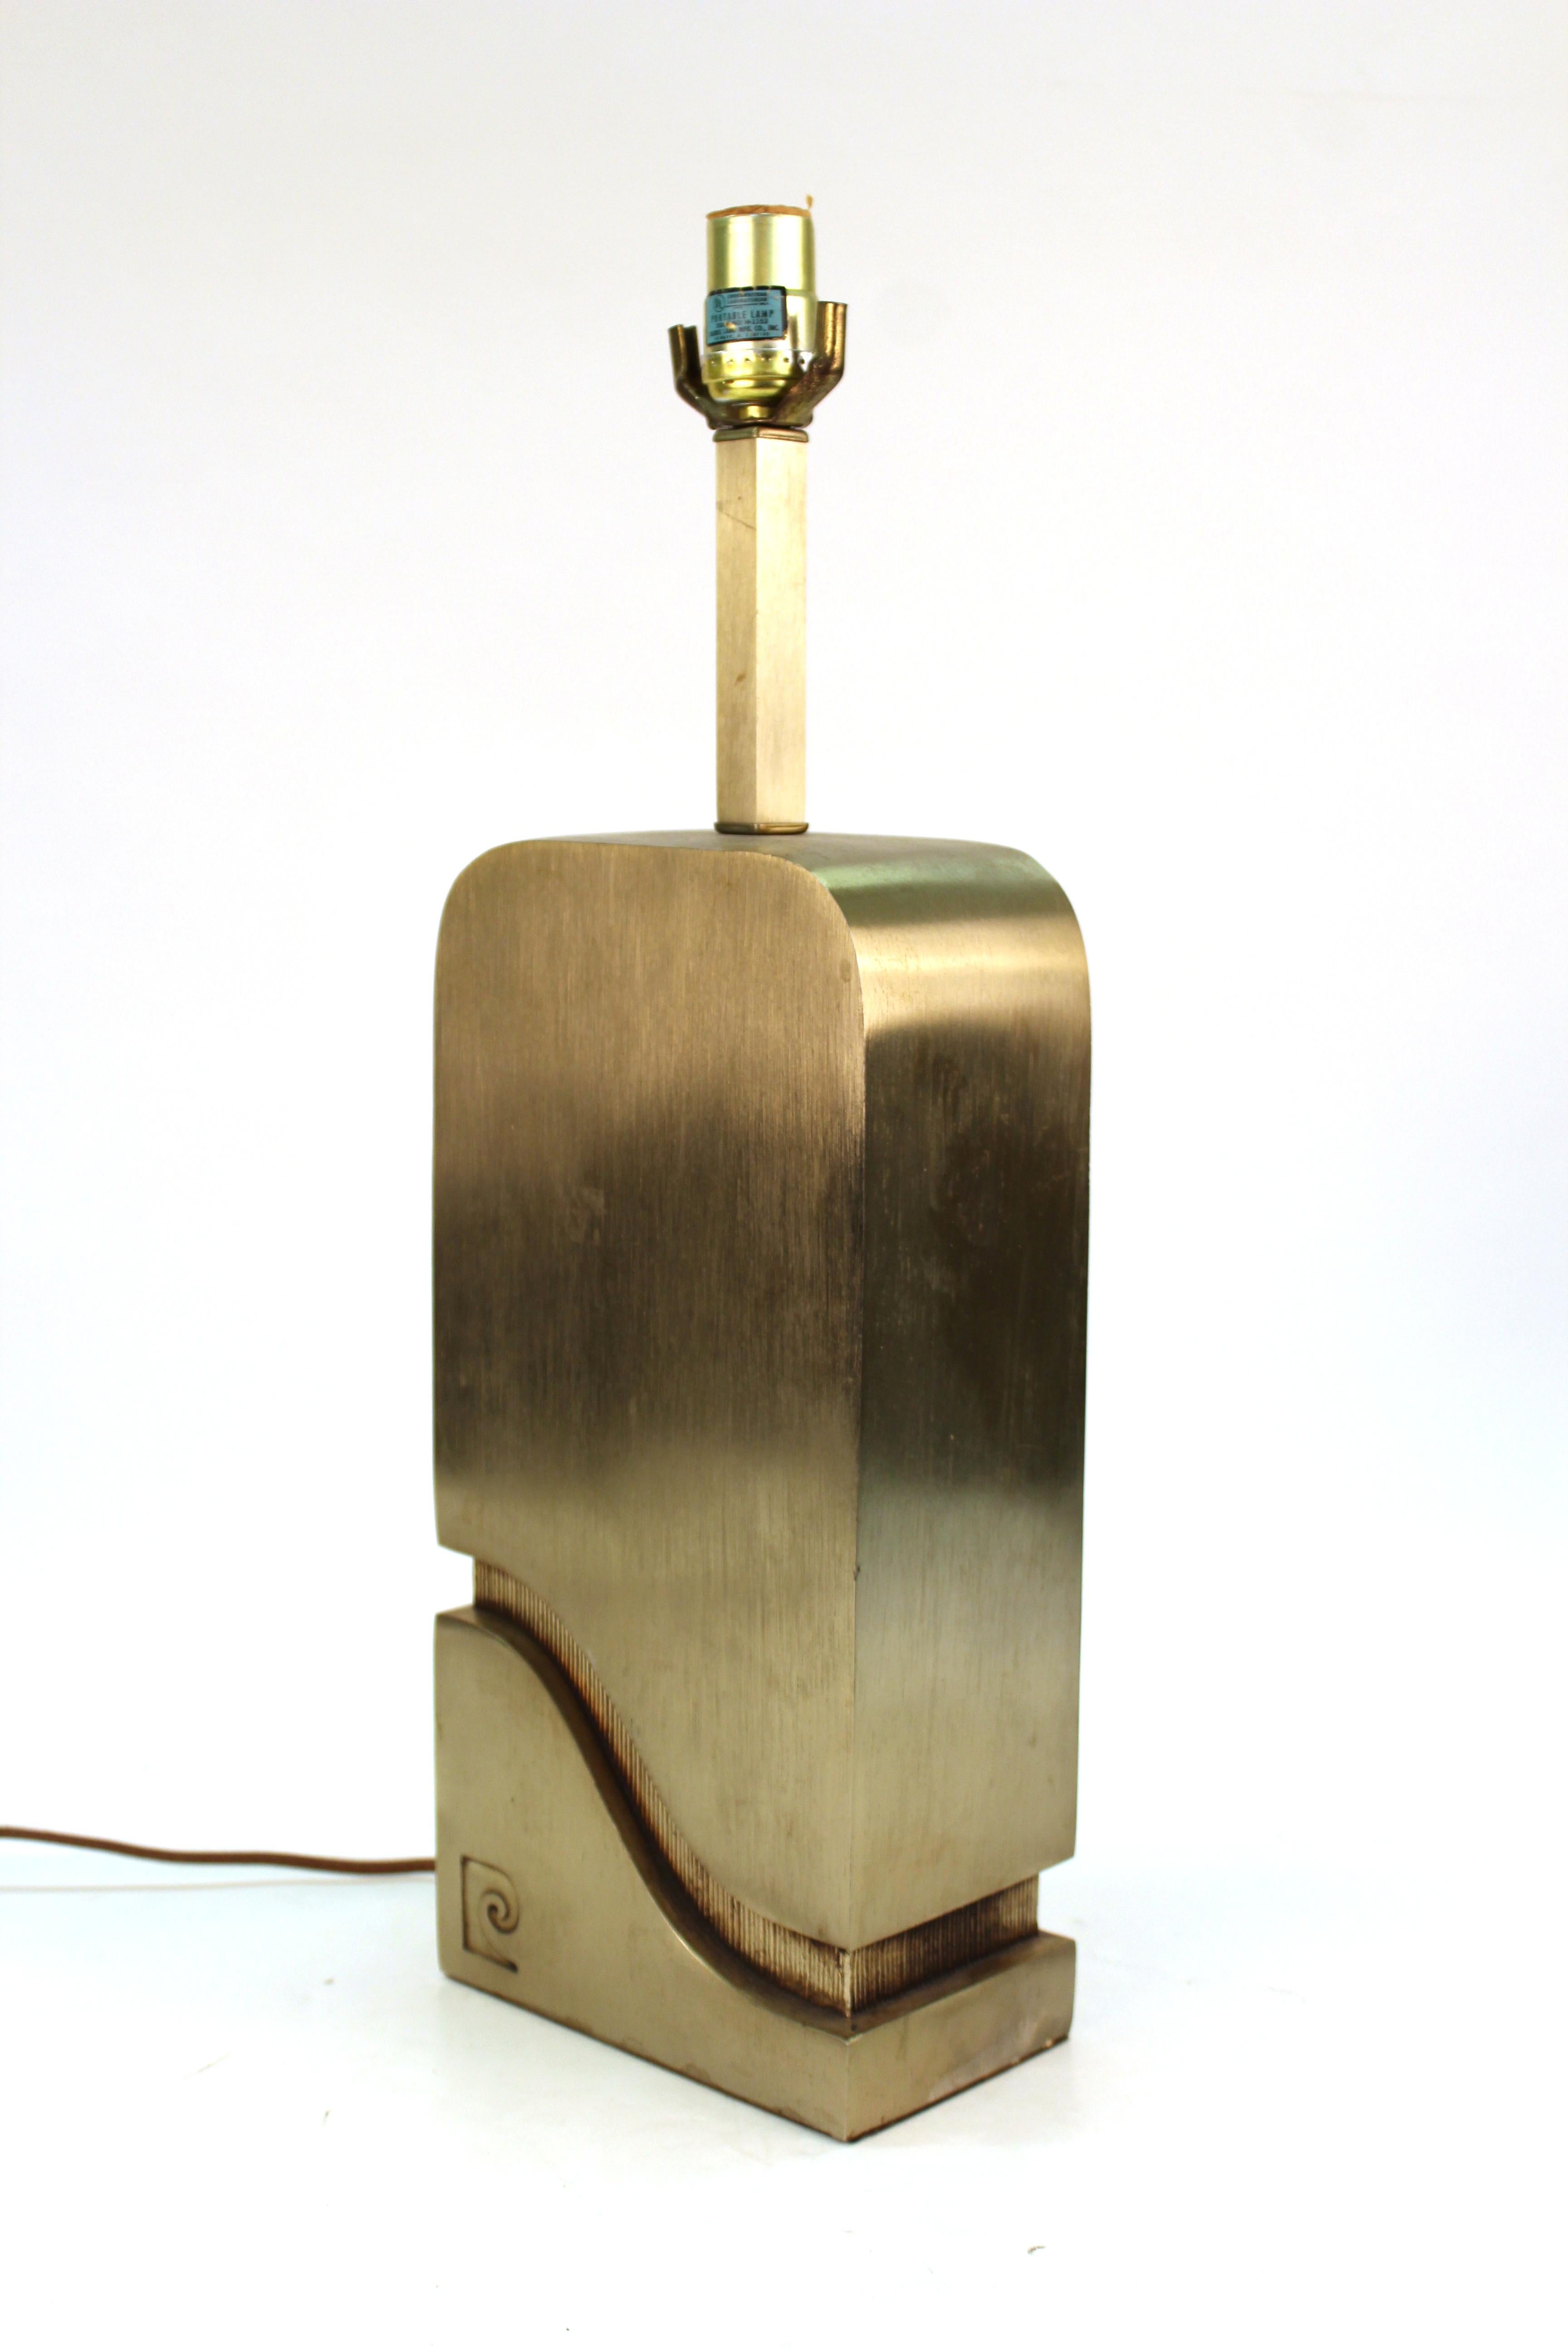 Modern metal table lamp with heavy rectangular body, created by Pierre Cardin in the 1970s. The piece has the Pierre Cardin monogram on the front side and is in great vintage condition, with some age-appropriate patina and wear.